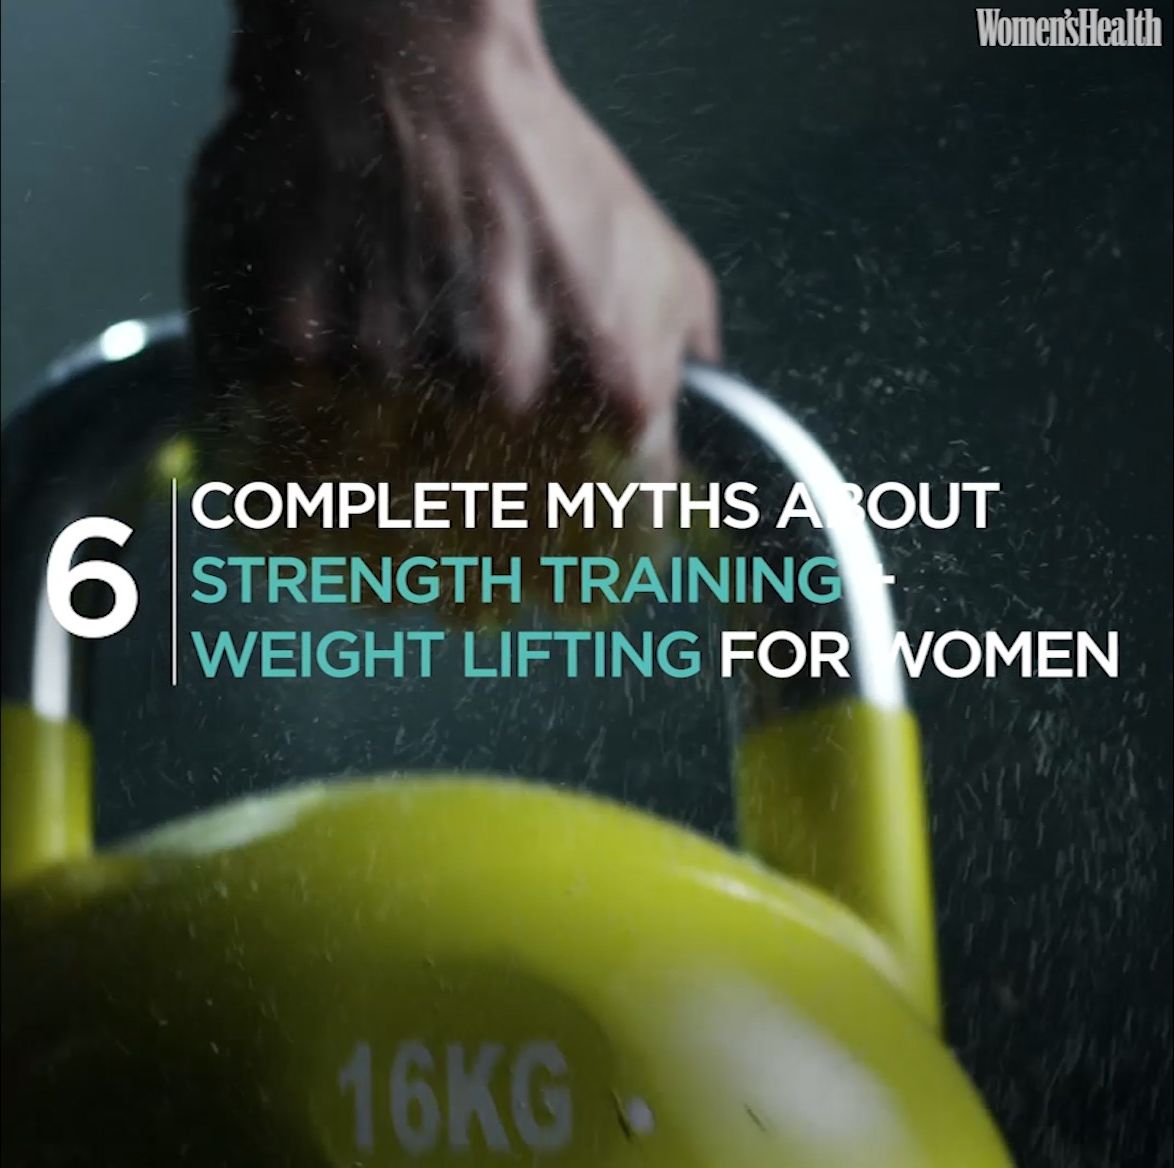 preview for 6 complete myths about strength training and weight lifting for women